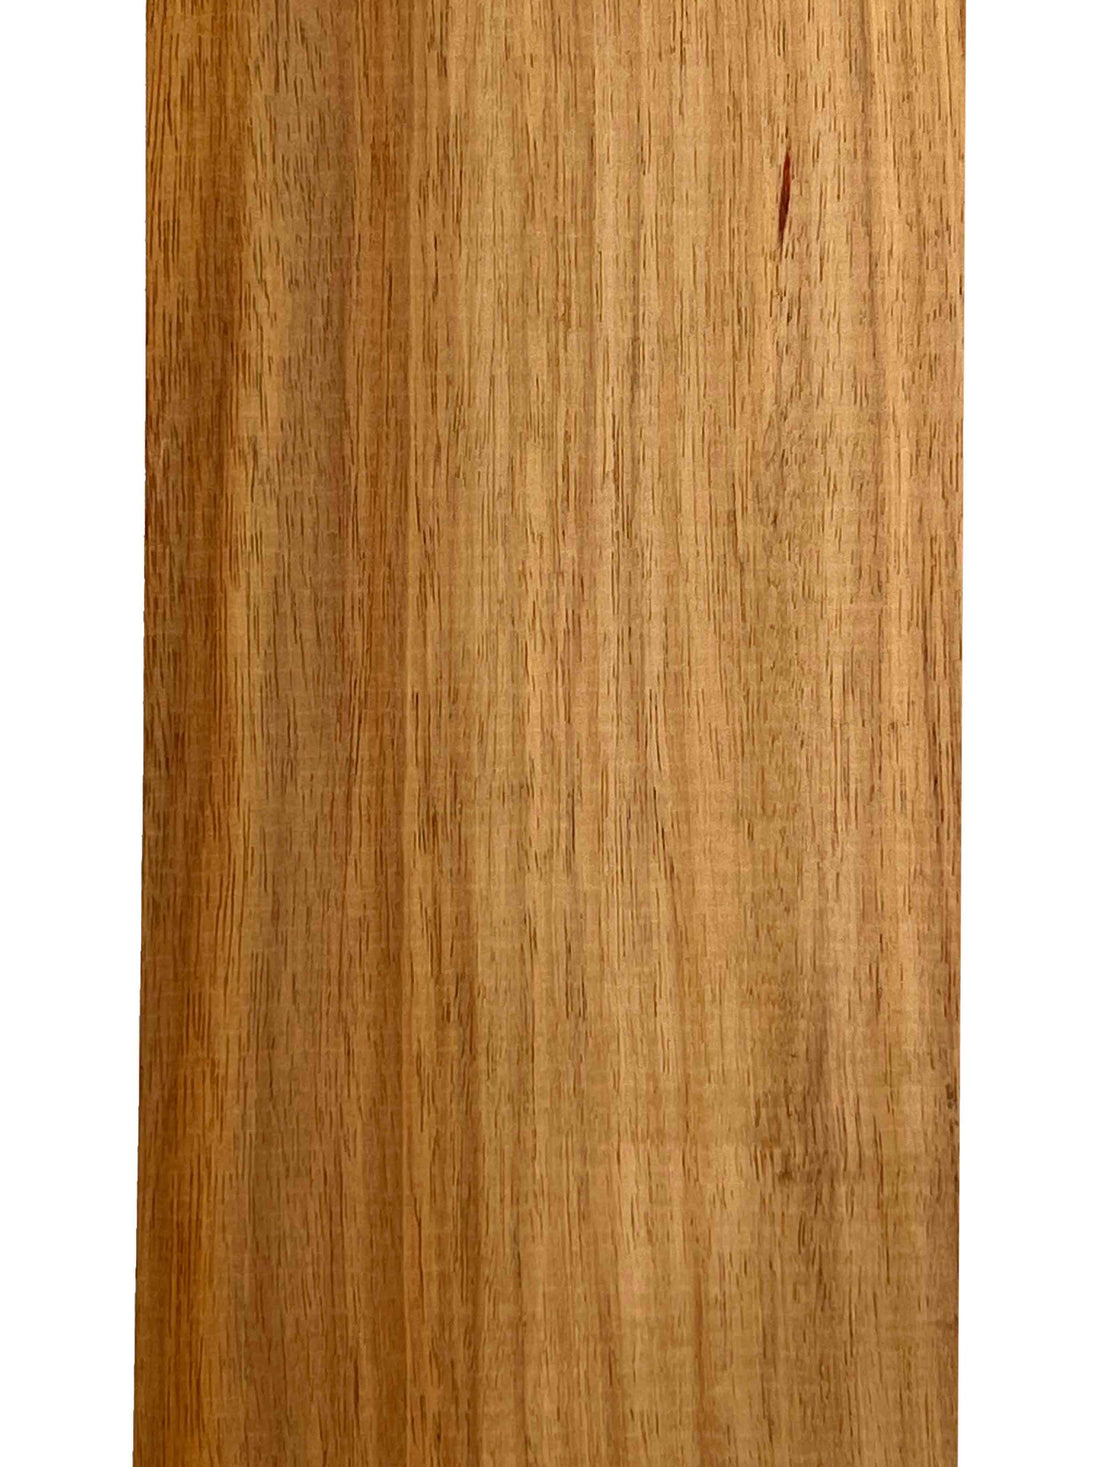 Canarywood Thin Stock Lumber Boards Wood Crafts - Exotic Wood Zone - Buy online Across USA 